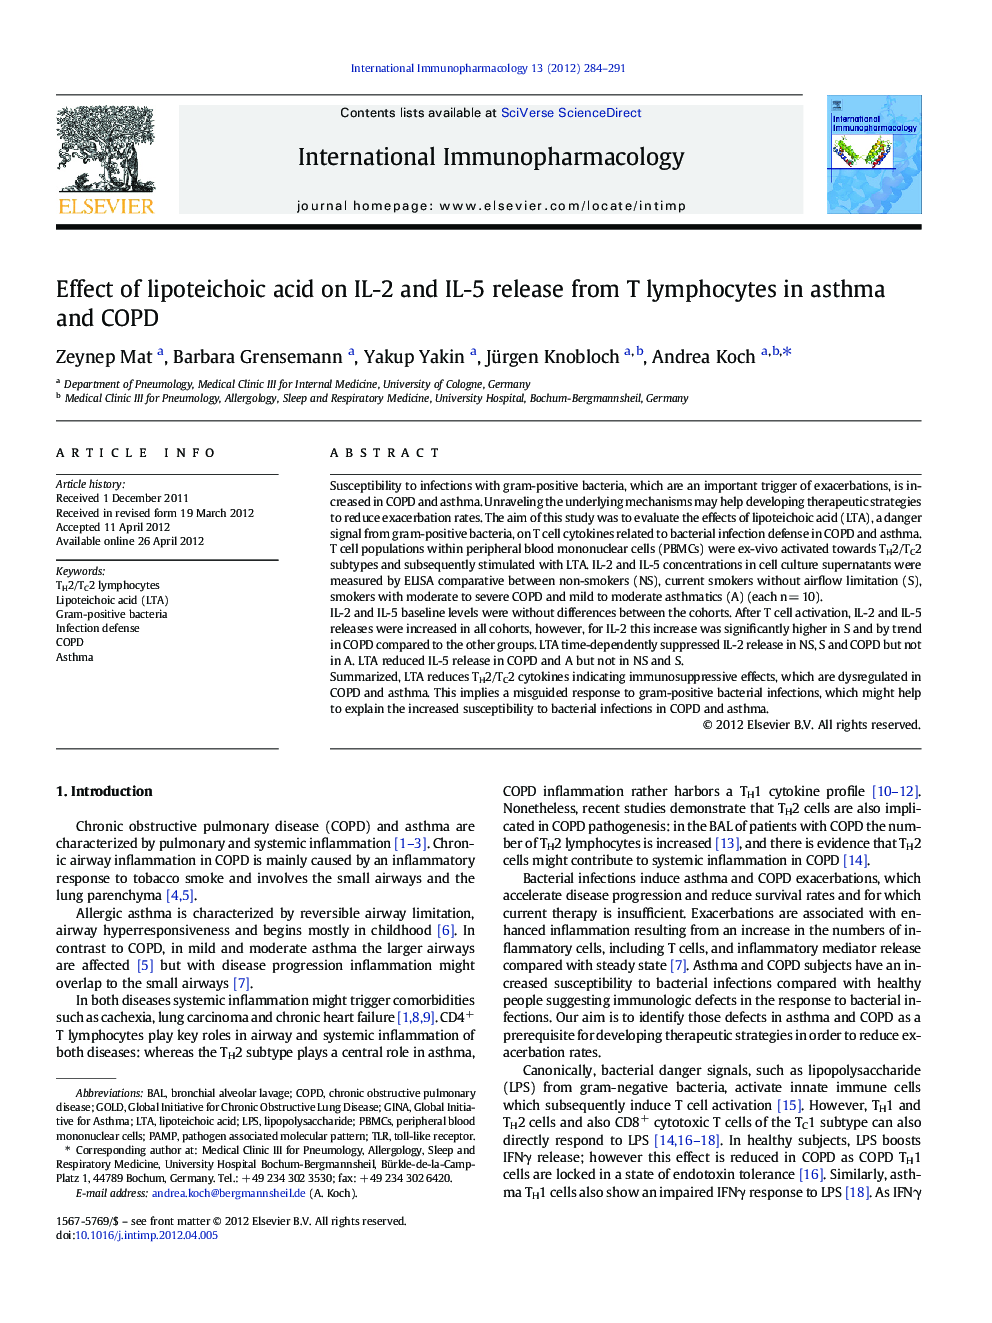 Effect of lipoteichoic acid on IL-2 and IL-5 release from T lymphocytes in asthma and COPD